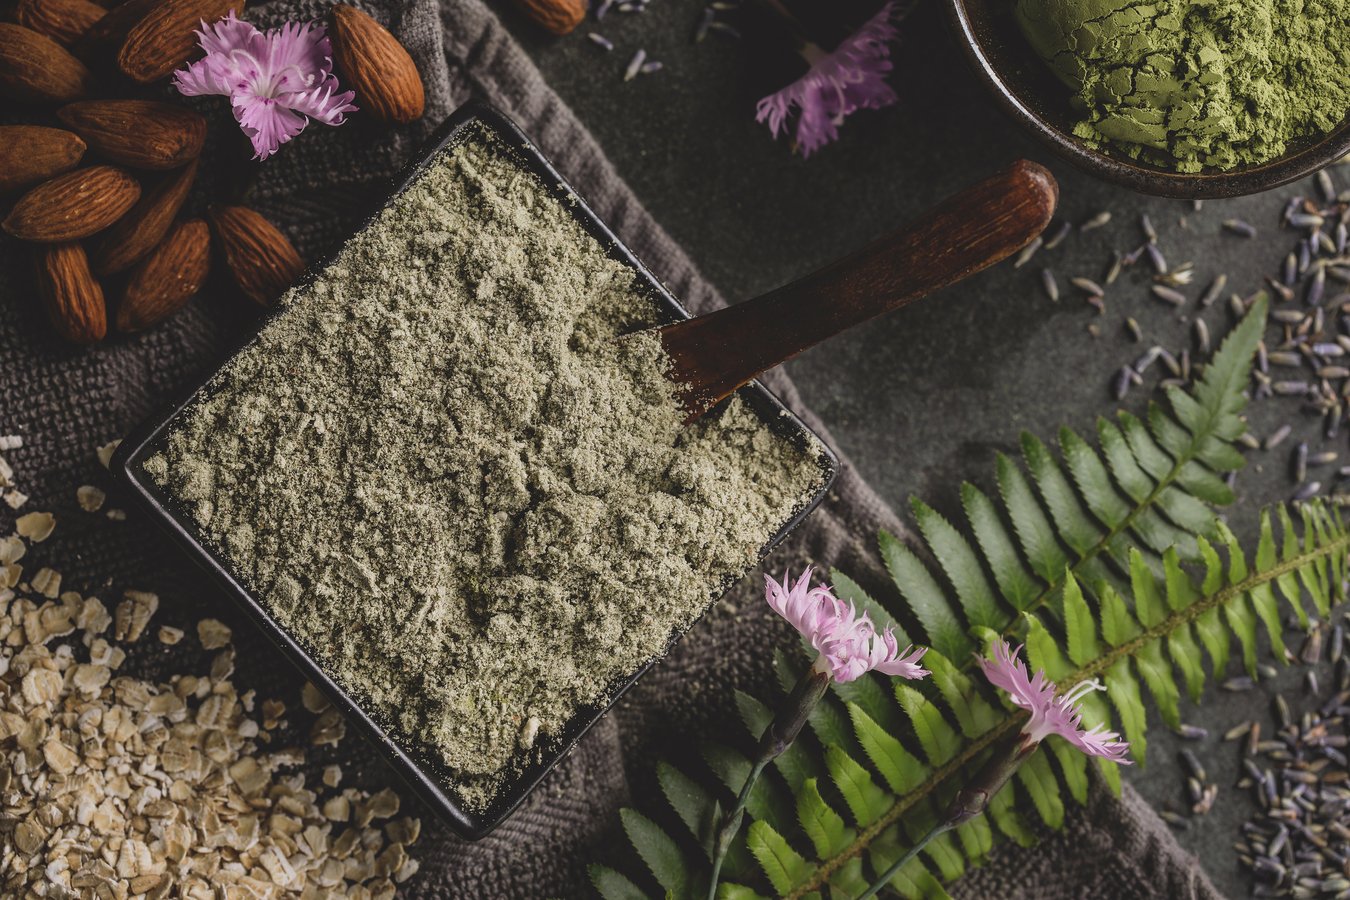 Matcha and lavender cleansing grains surrounded by almonds, oatmeal and lush ferns.